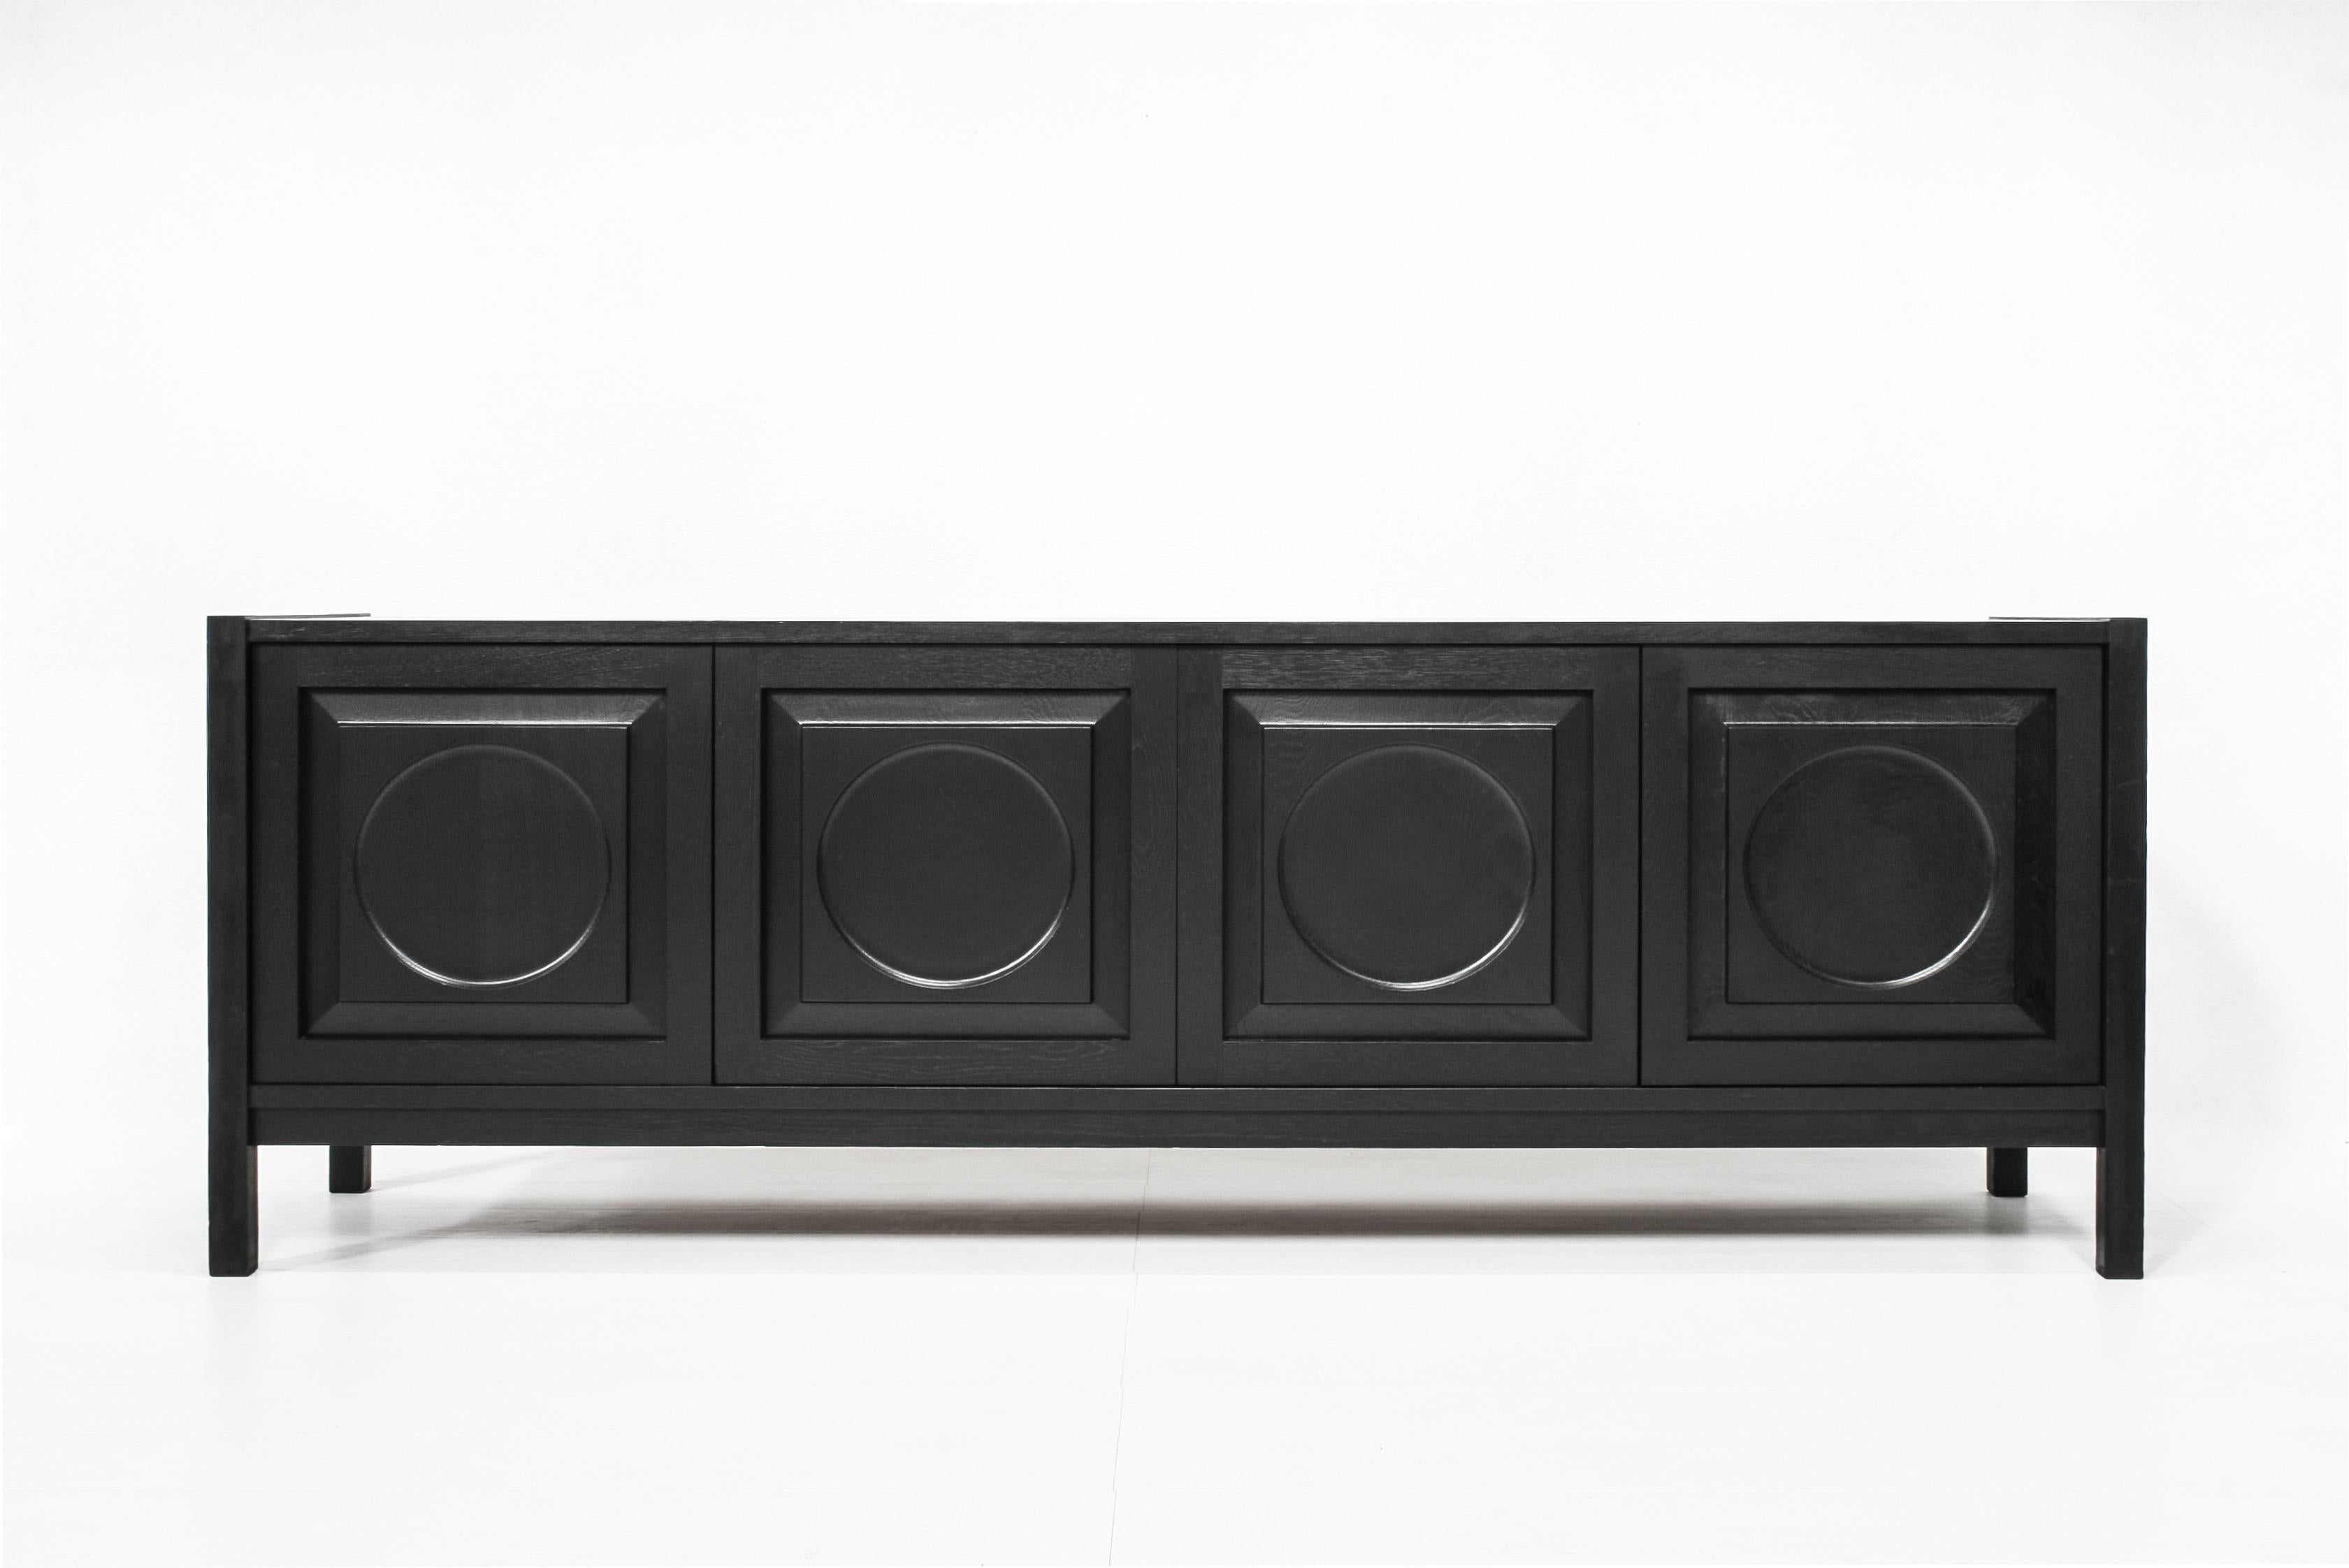 Beautiful brutalist sideboard with four abstract circle doors in ebonized oak.

The second door hides four drawers.